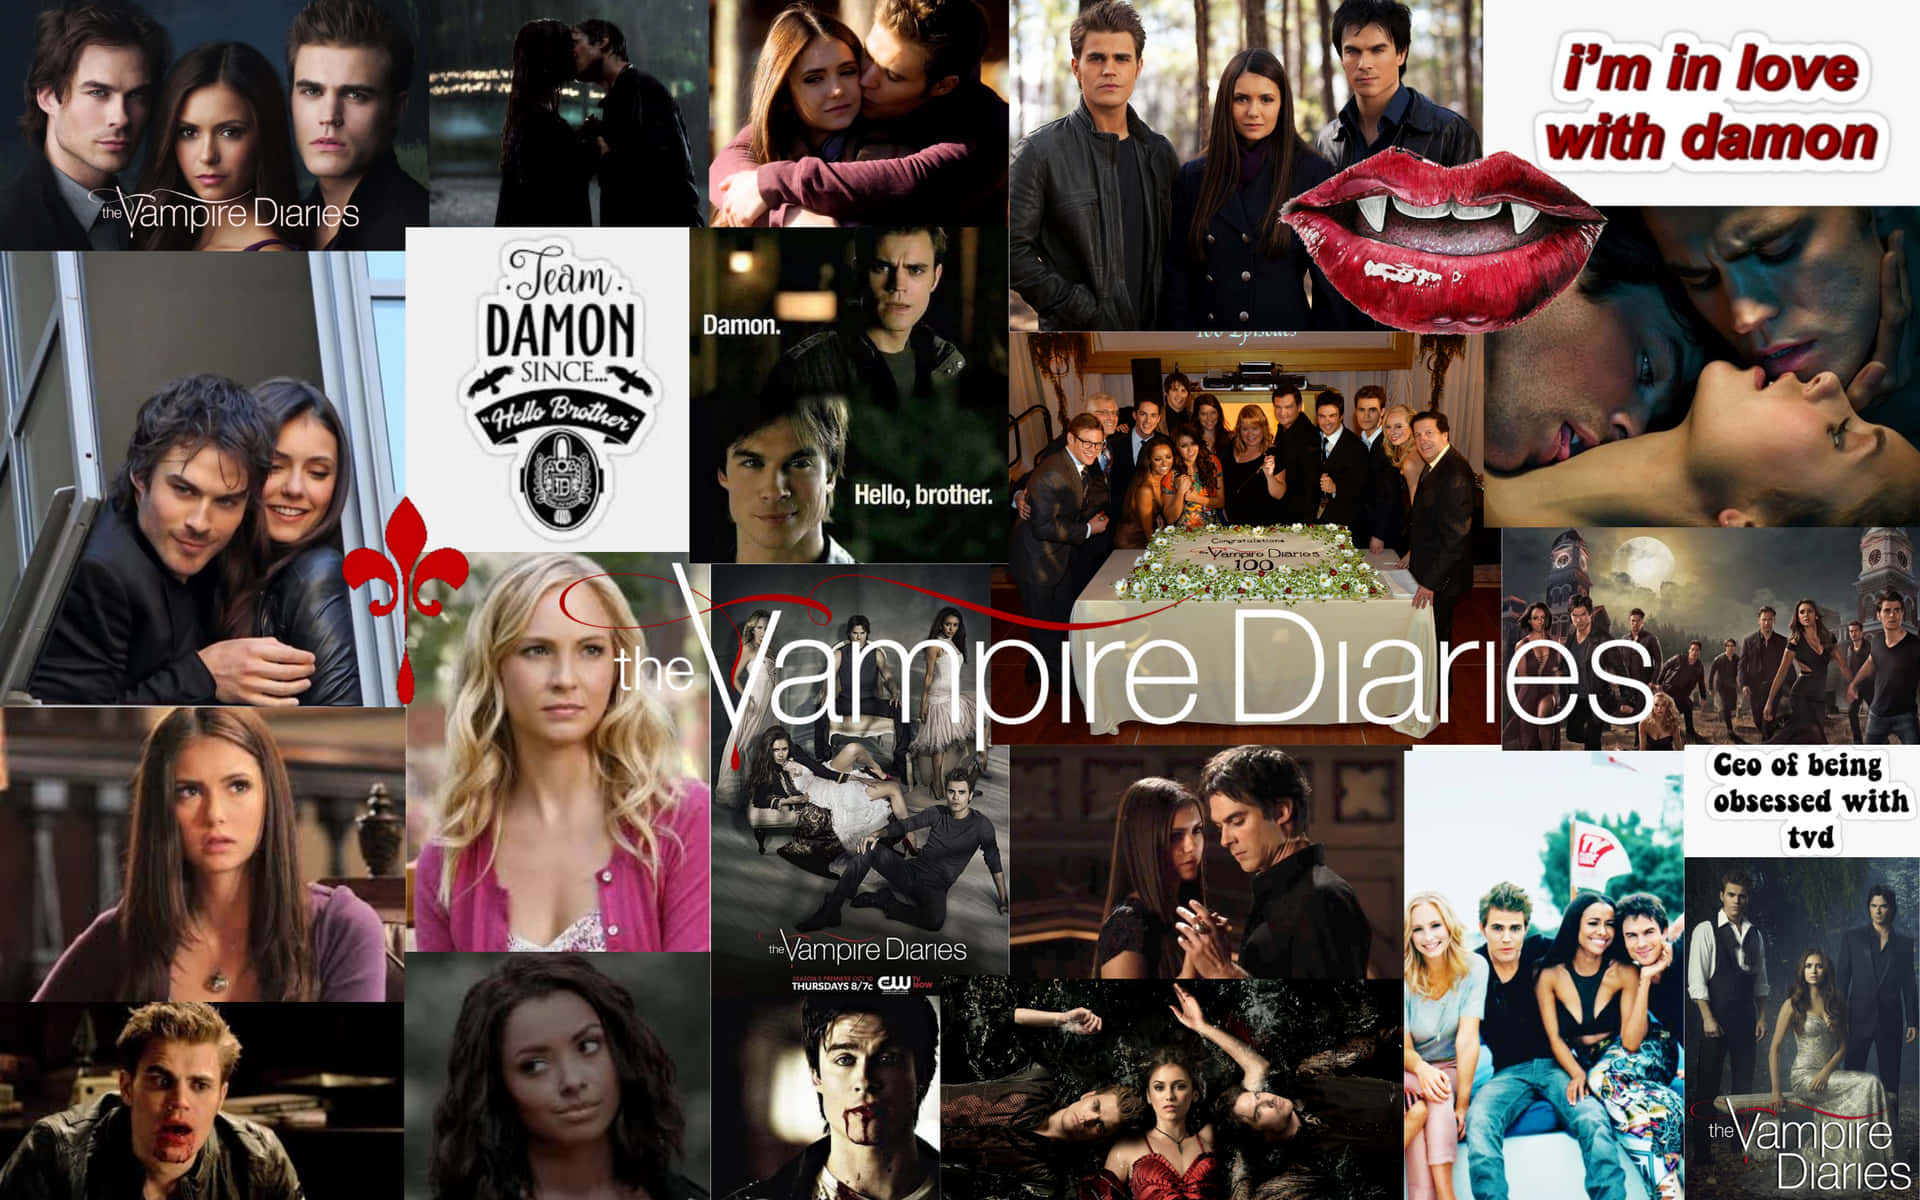 Enjoy catching up on all the paranormal drama of The Vampire Diaries on your iphone! Wallpaper